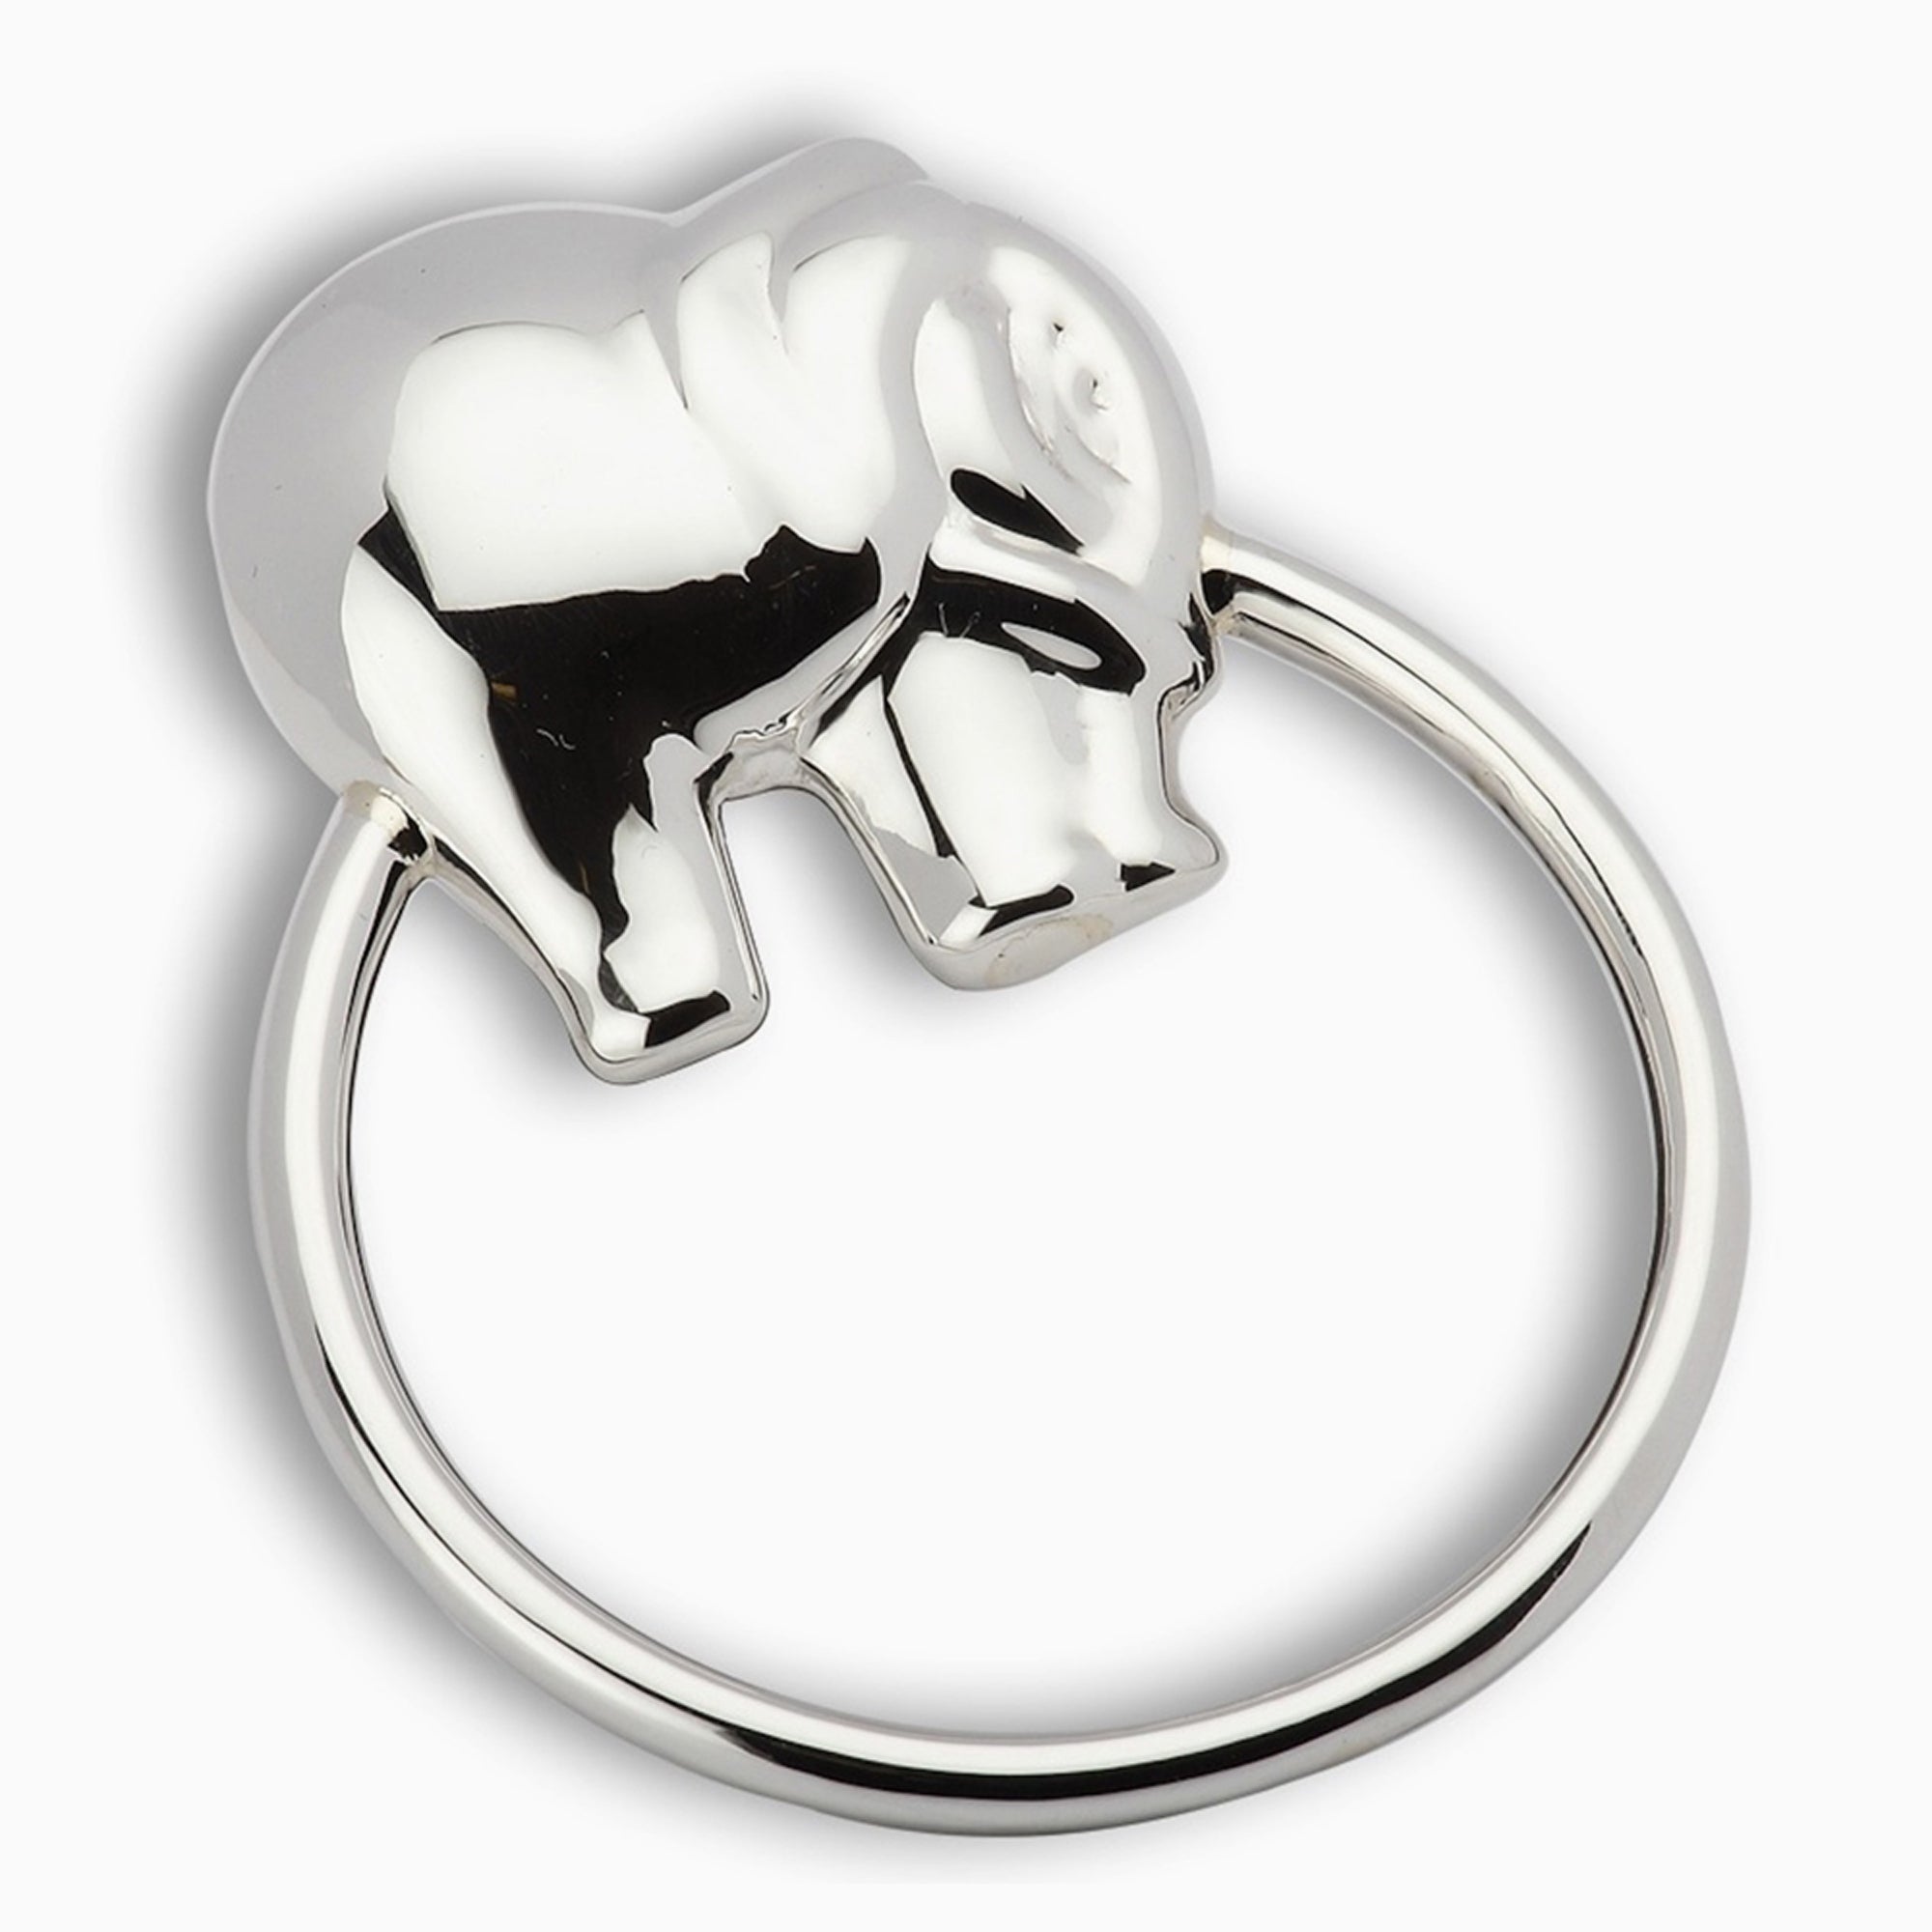 Aprilwell 4Pcs Ethnic Elephant Rings Set for Women Silver Color Vintage  Animal Stamp Faith Opening Anillos Jewelry Bague Gadgets